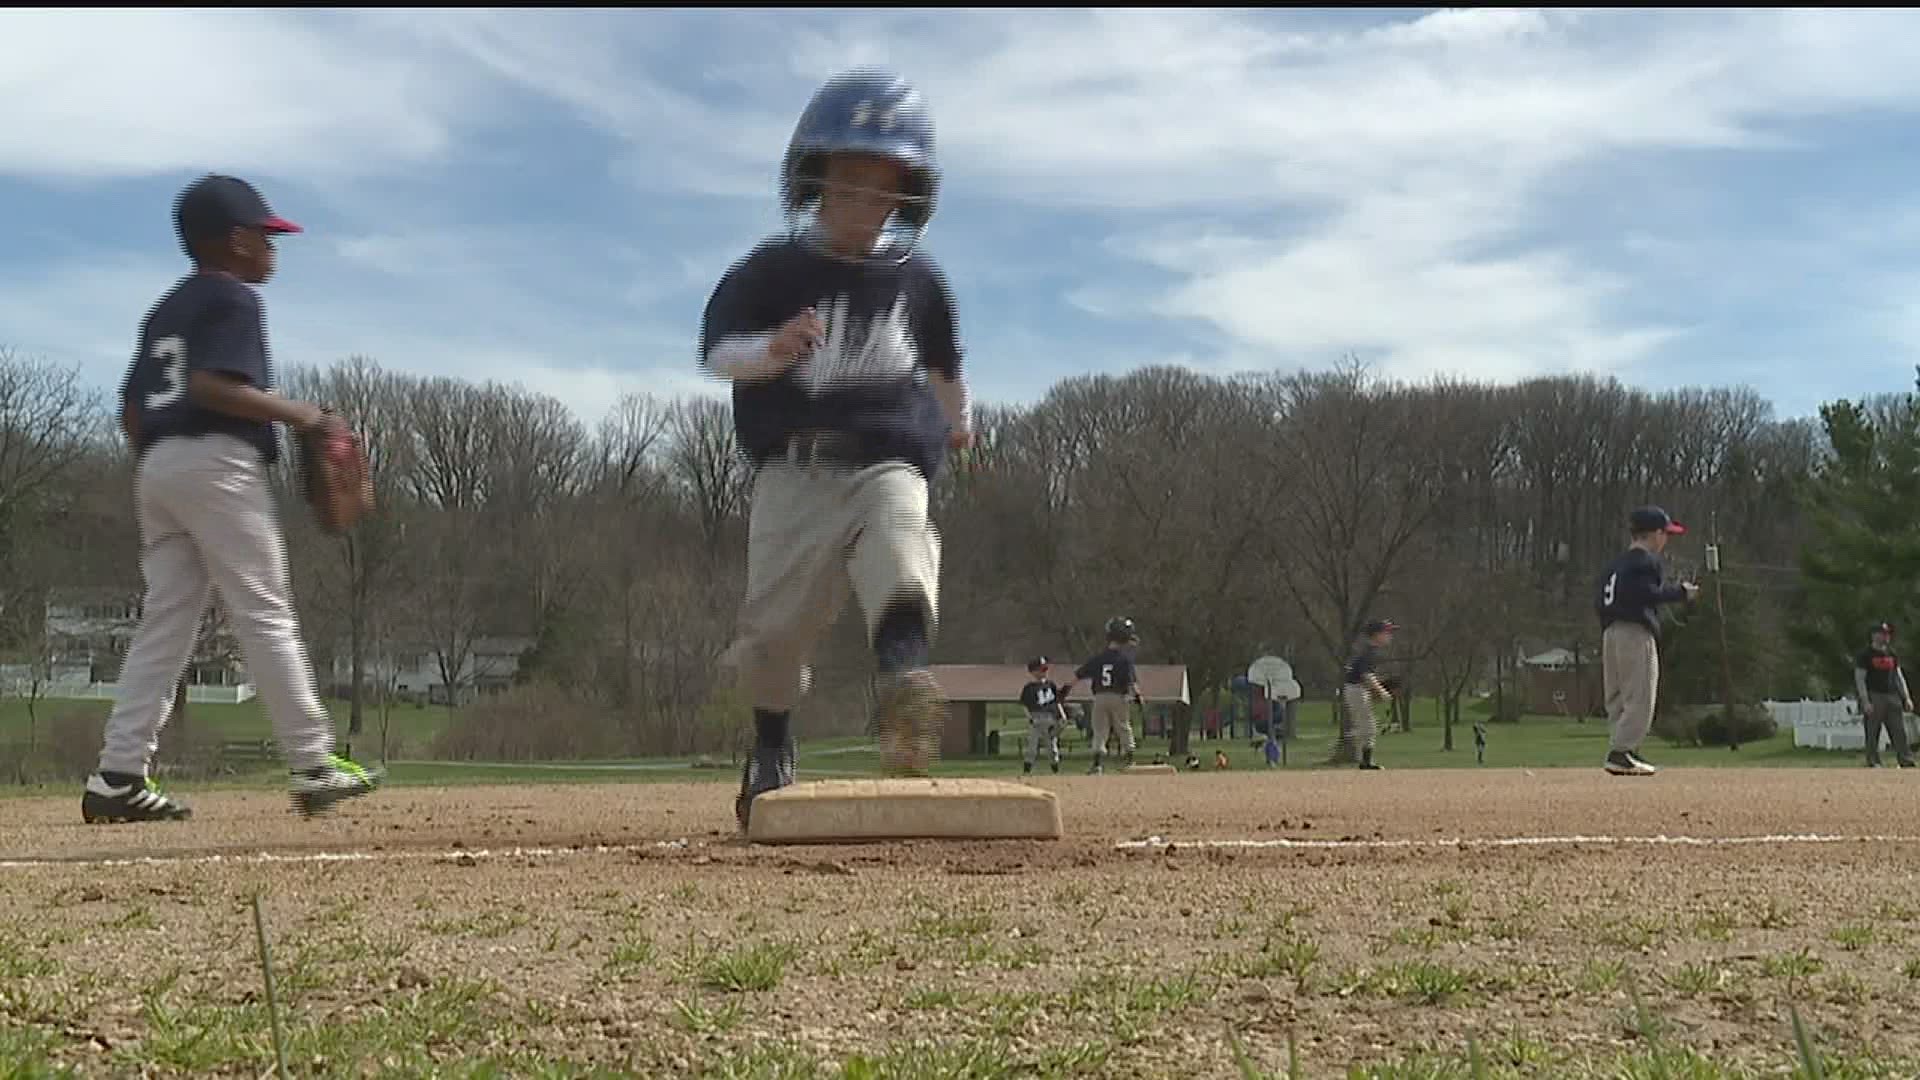 The roundtable examined how youth baseball and softball can safely resume in communities.